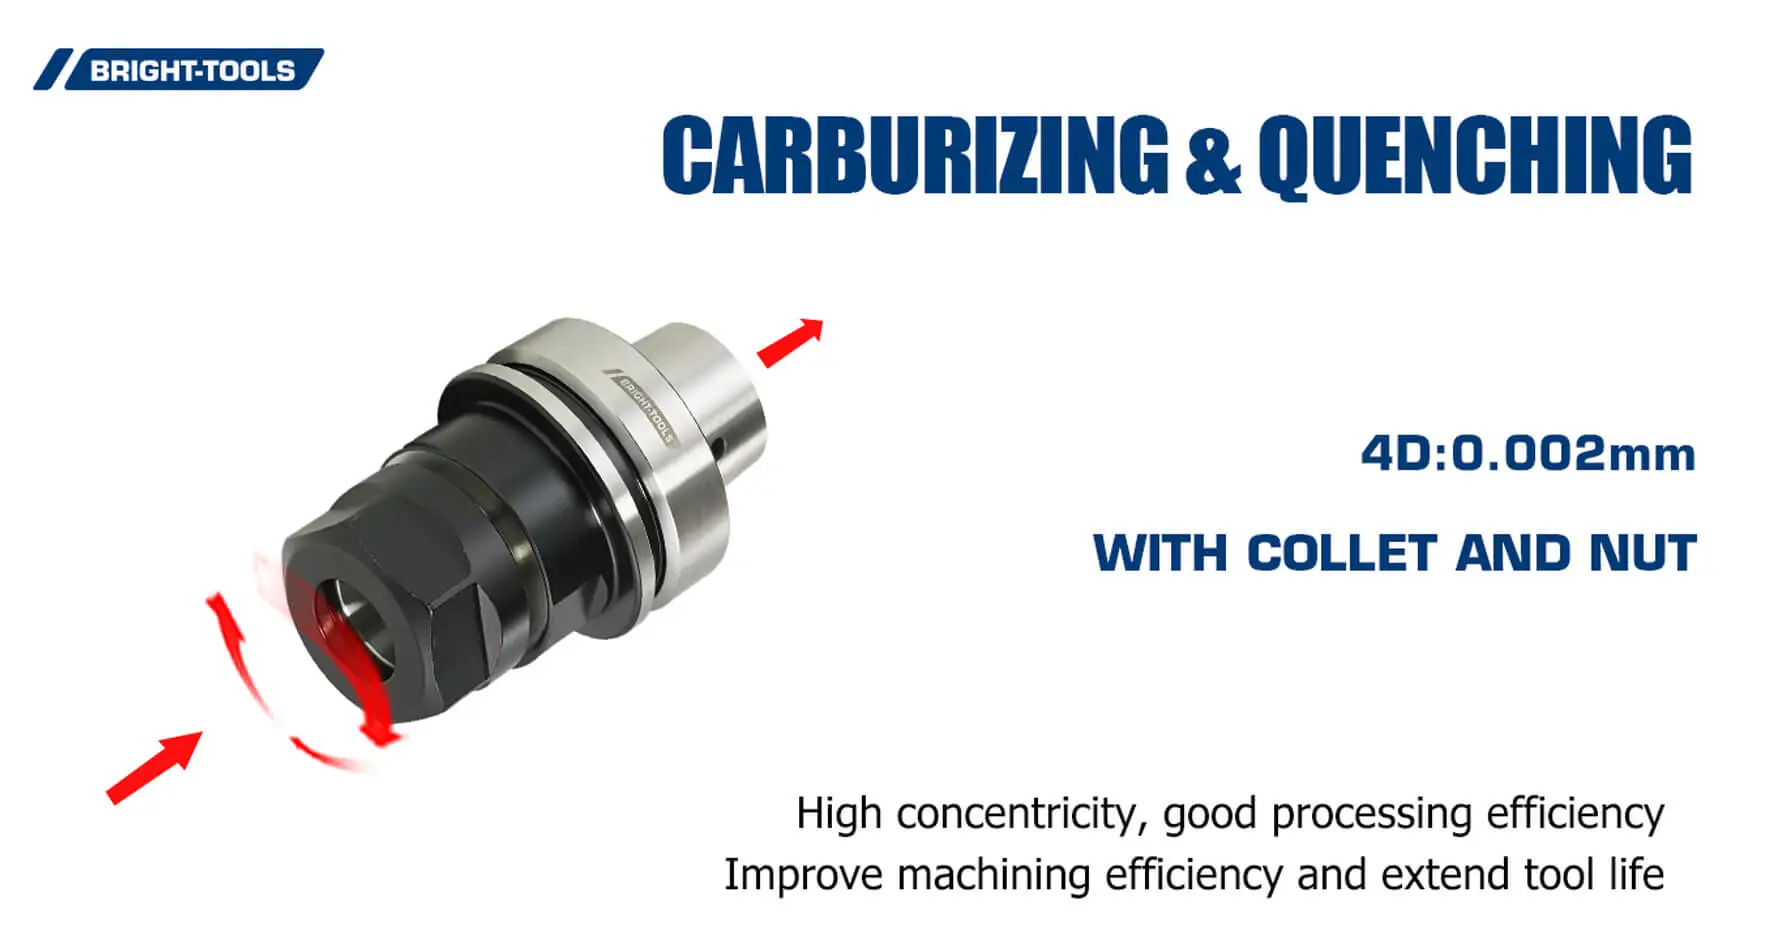 Carburizing & Quenching Of Hsk E32 Tool Holder